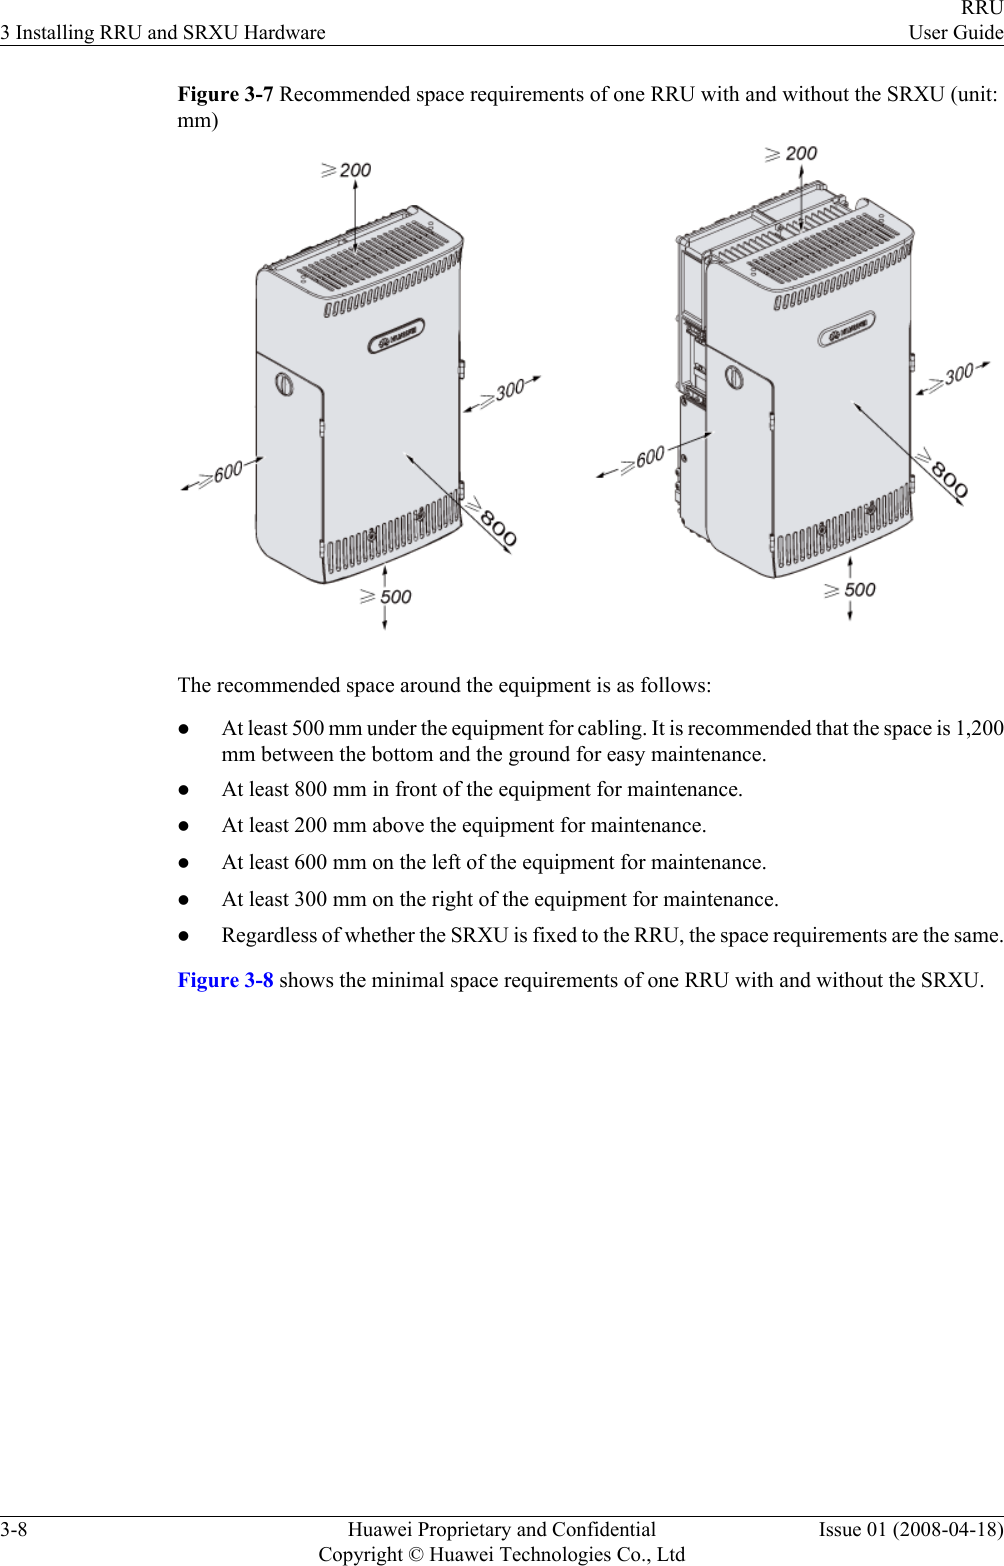 Figure 3-7 Recommended space requirements of one RRU with and without the SRXU (unit:mm)The recommended space around the equipment is as follows:lAt least 500 mm under the equipment for cabling. It is recommended that the space is 1,200mm between the bottom and the ground for easy maintenance.lAt least 800 mm in front of the equipment for maintenance.lAt least 200 mm above the equipment for maintenance.lAt least 600 mm on the left of the equipment for maintenance.lAt least 300 mm on the right of the equipment for maintenance.lRegardless of whether the SRXU is fixed to the RRU, the space requirements are the same.Figure 3-8 shows the minimal space requirements of one RRU with and without the SRXU.3 Installing RRU and SRXU HardwareRRUUser Guide3-8 Huawei Proprietary and ConfidentialCopyright © Huawei Technologies Co., LtdIssue 01 (2008-04-18)